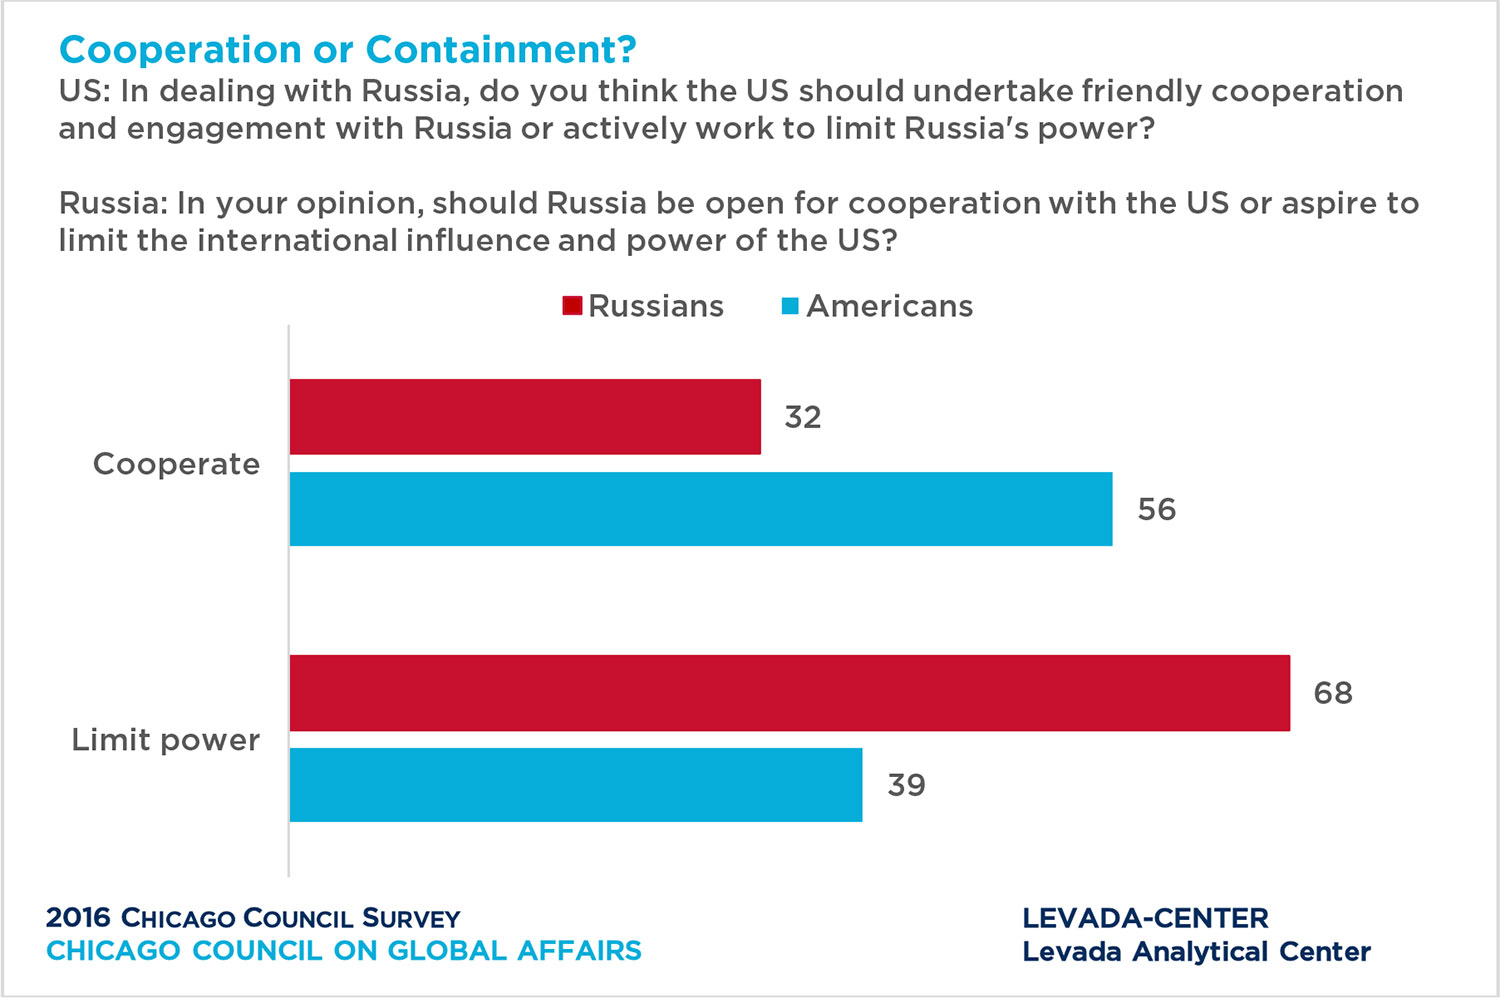 Bar graph showing American and Russian opinion of cooperation or containment.